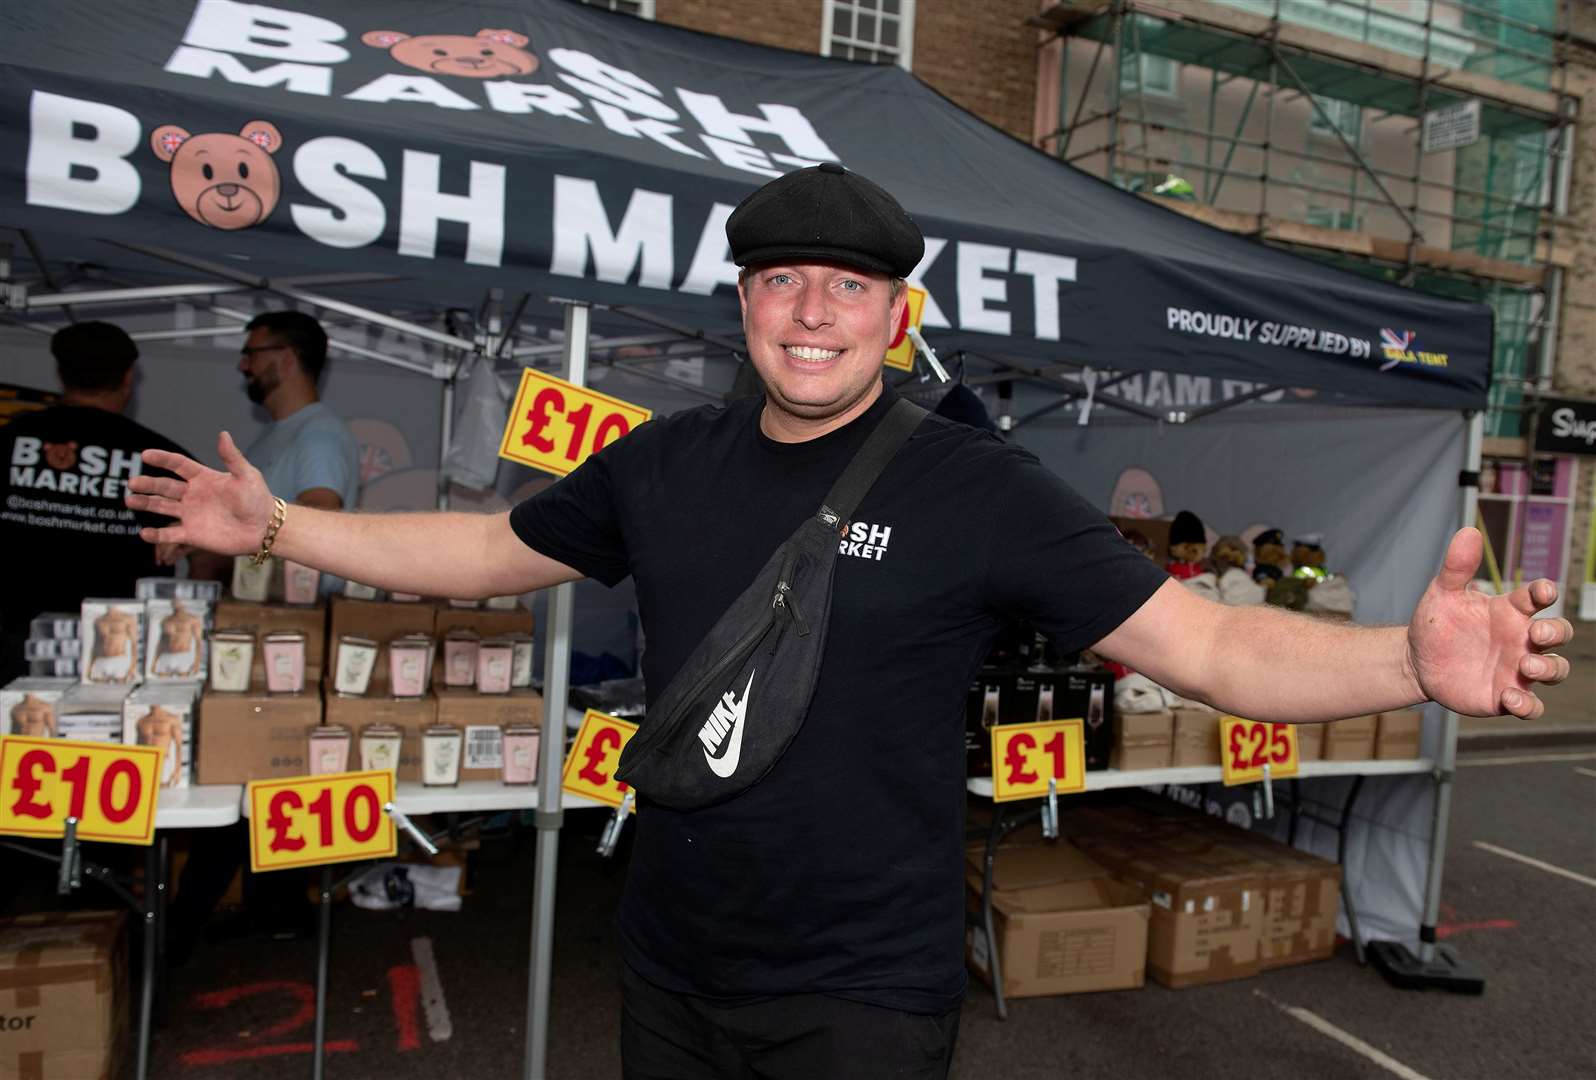 Tom Skinner on his Bosh Market stall in Bury St Edmunds. Picture: Mark Westley